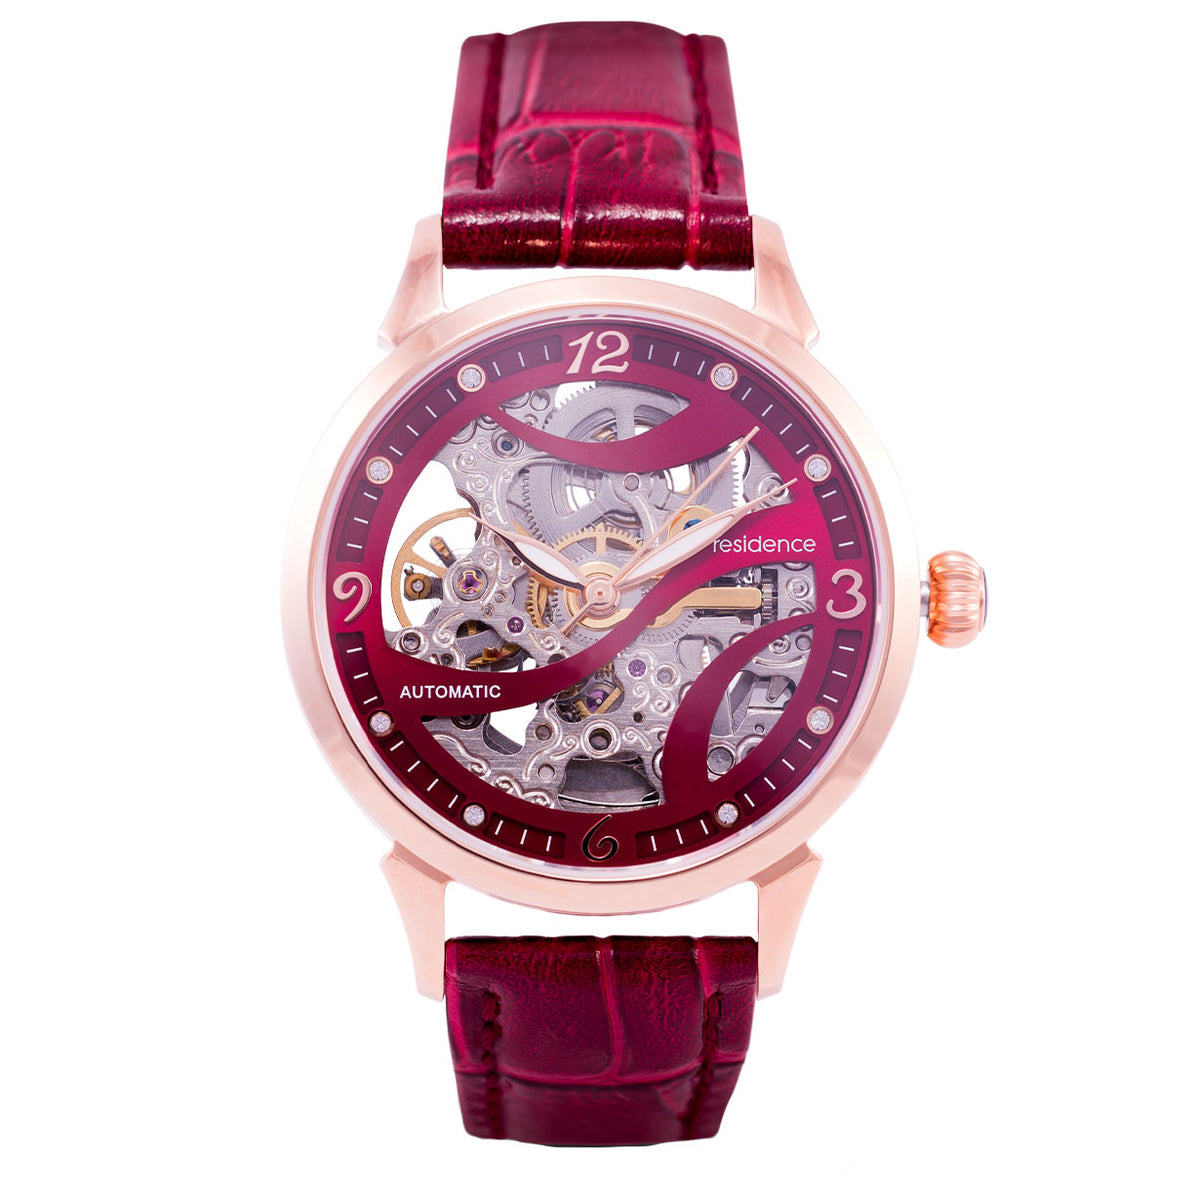 COLOR Steel Watch Rose Gold/ Bordeaux red